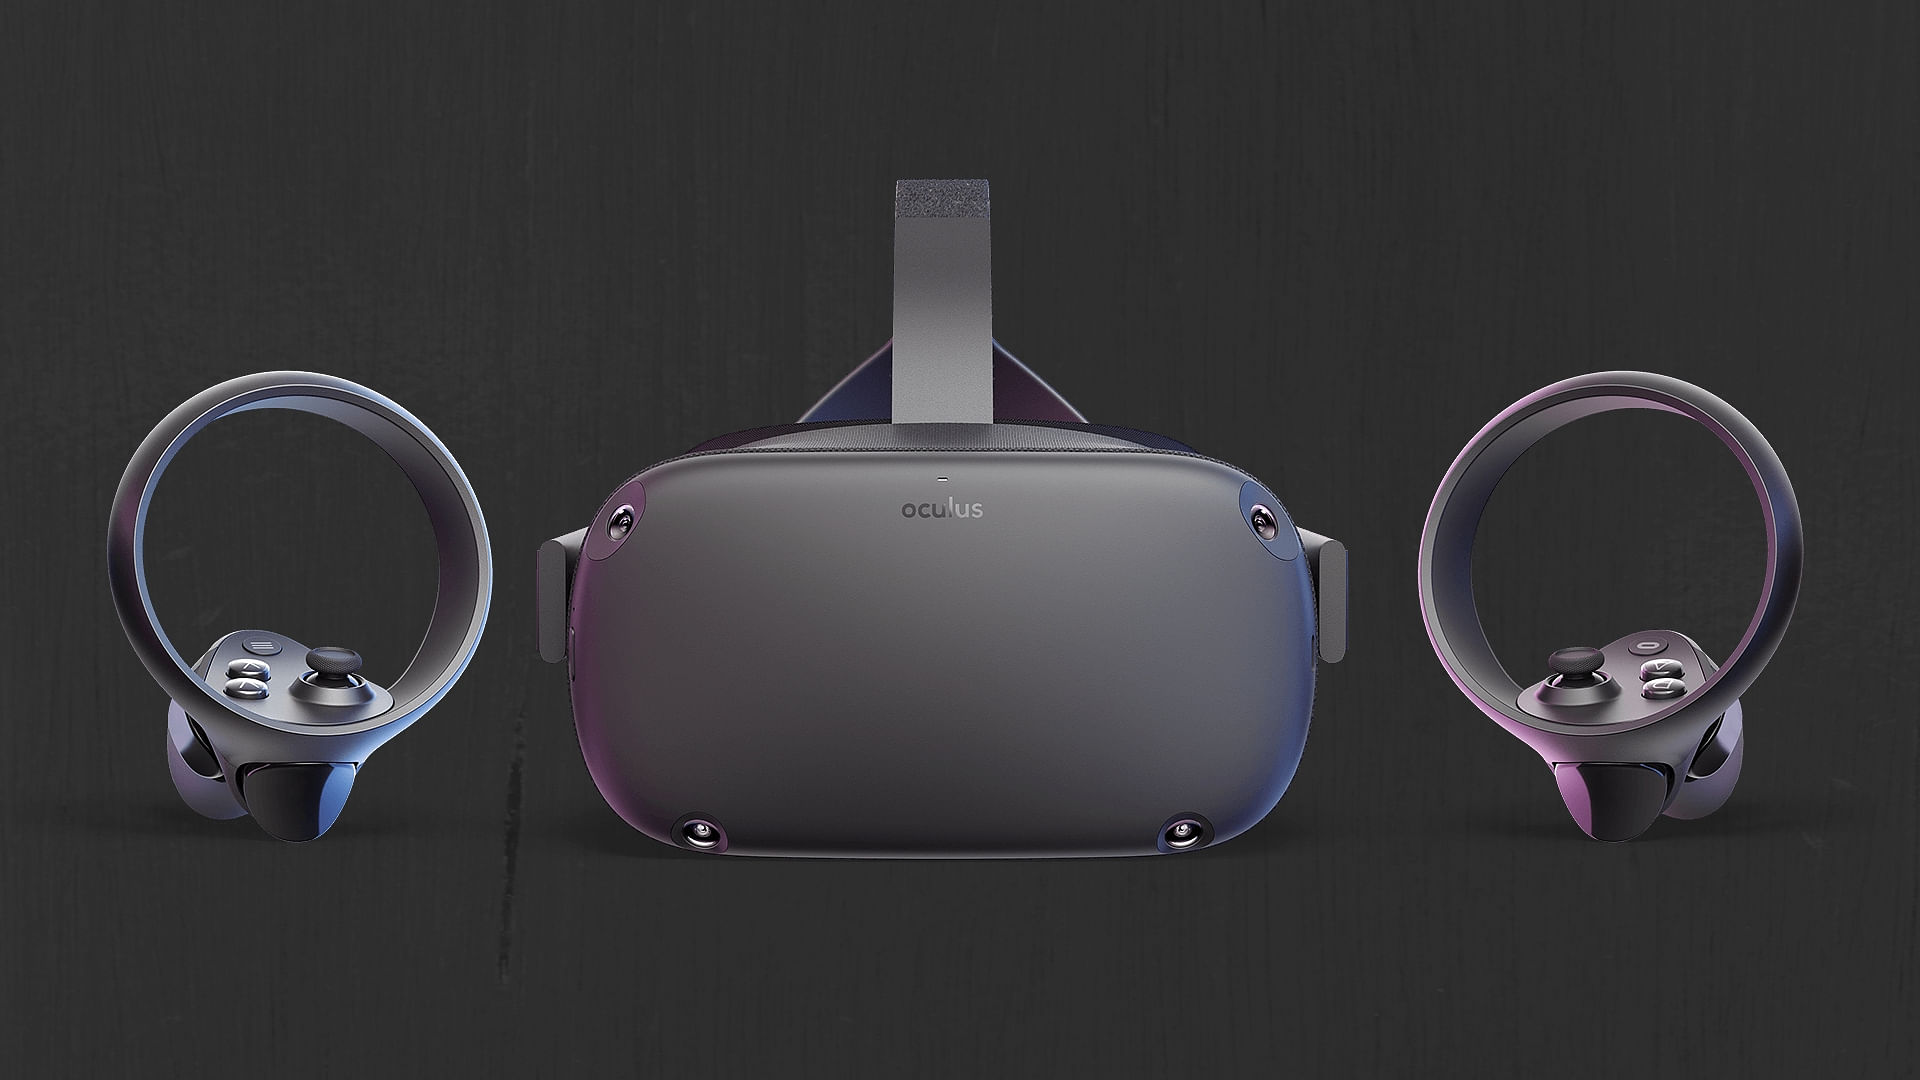 The Oculus Quest VR Headset.